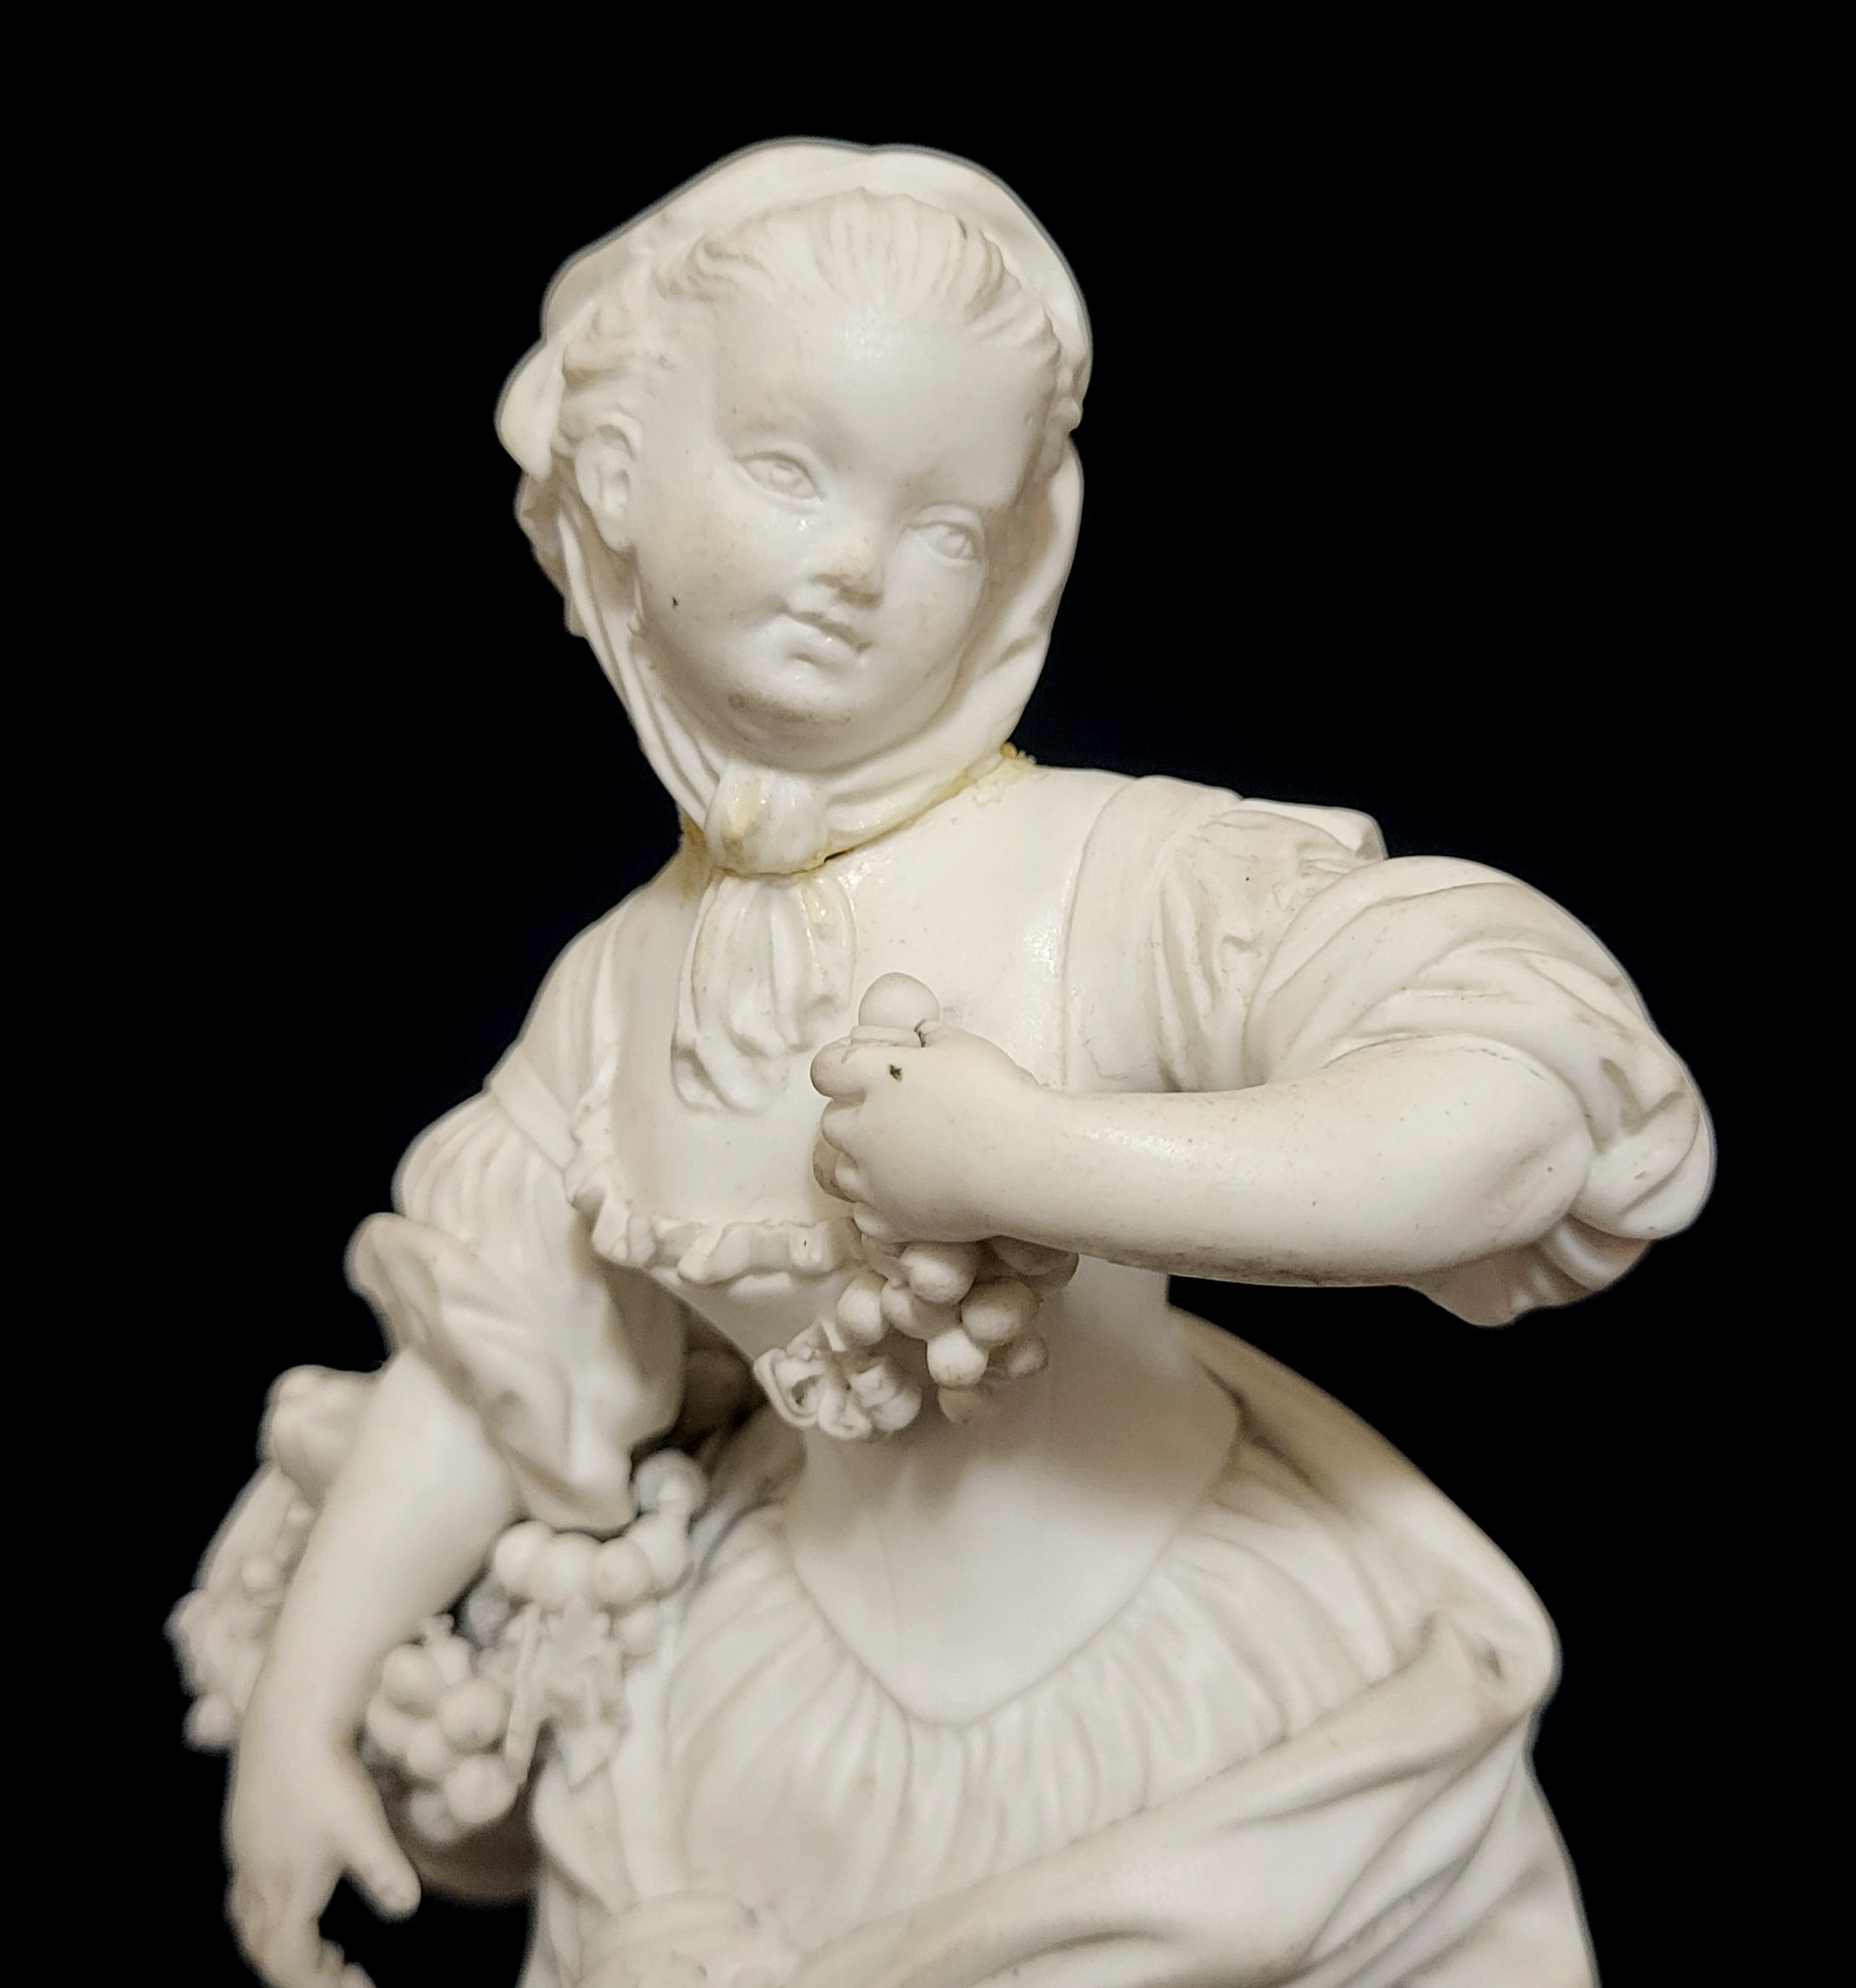 A PAIR OF EARLY 19TH CENTURY DERBY BLANC DE CHINE PORCELAIN FIGURES Female characters wearing period - Image 4 of 11